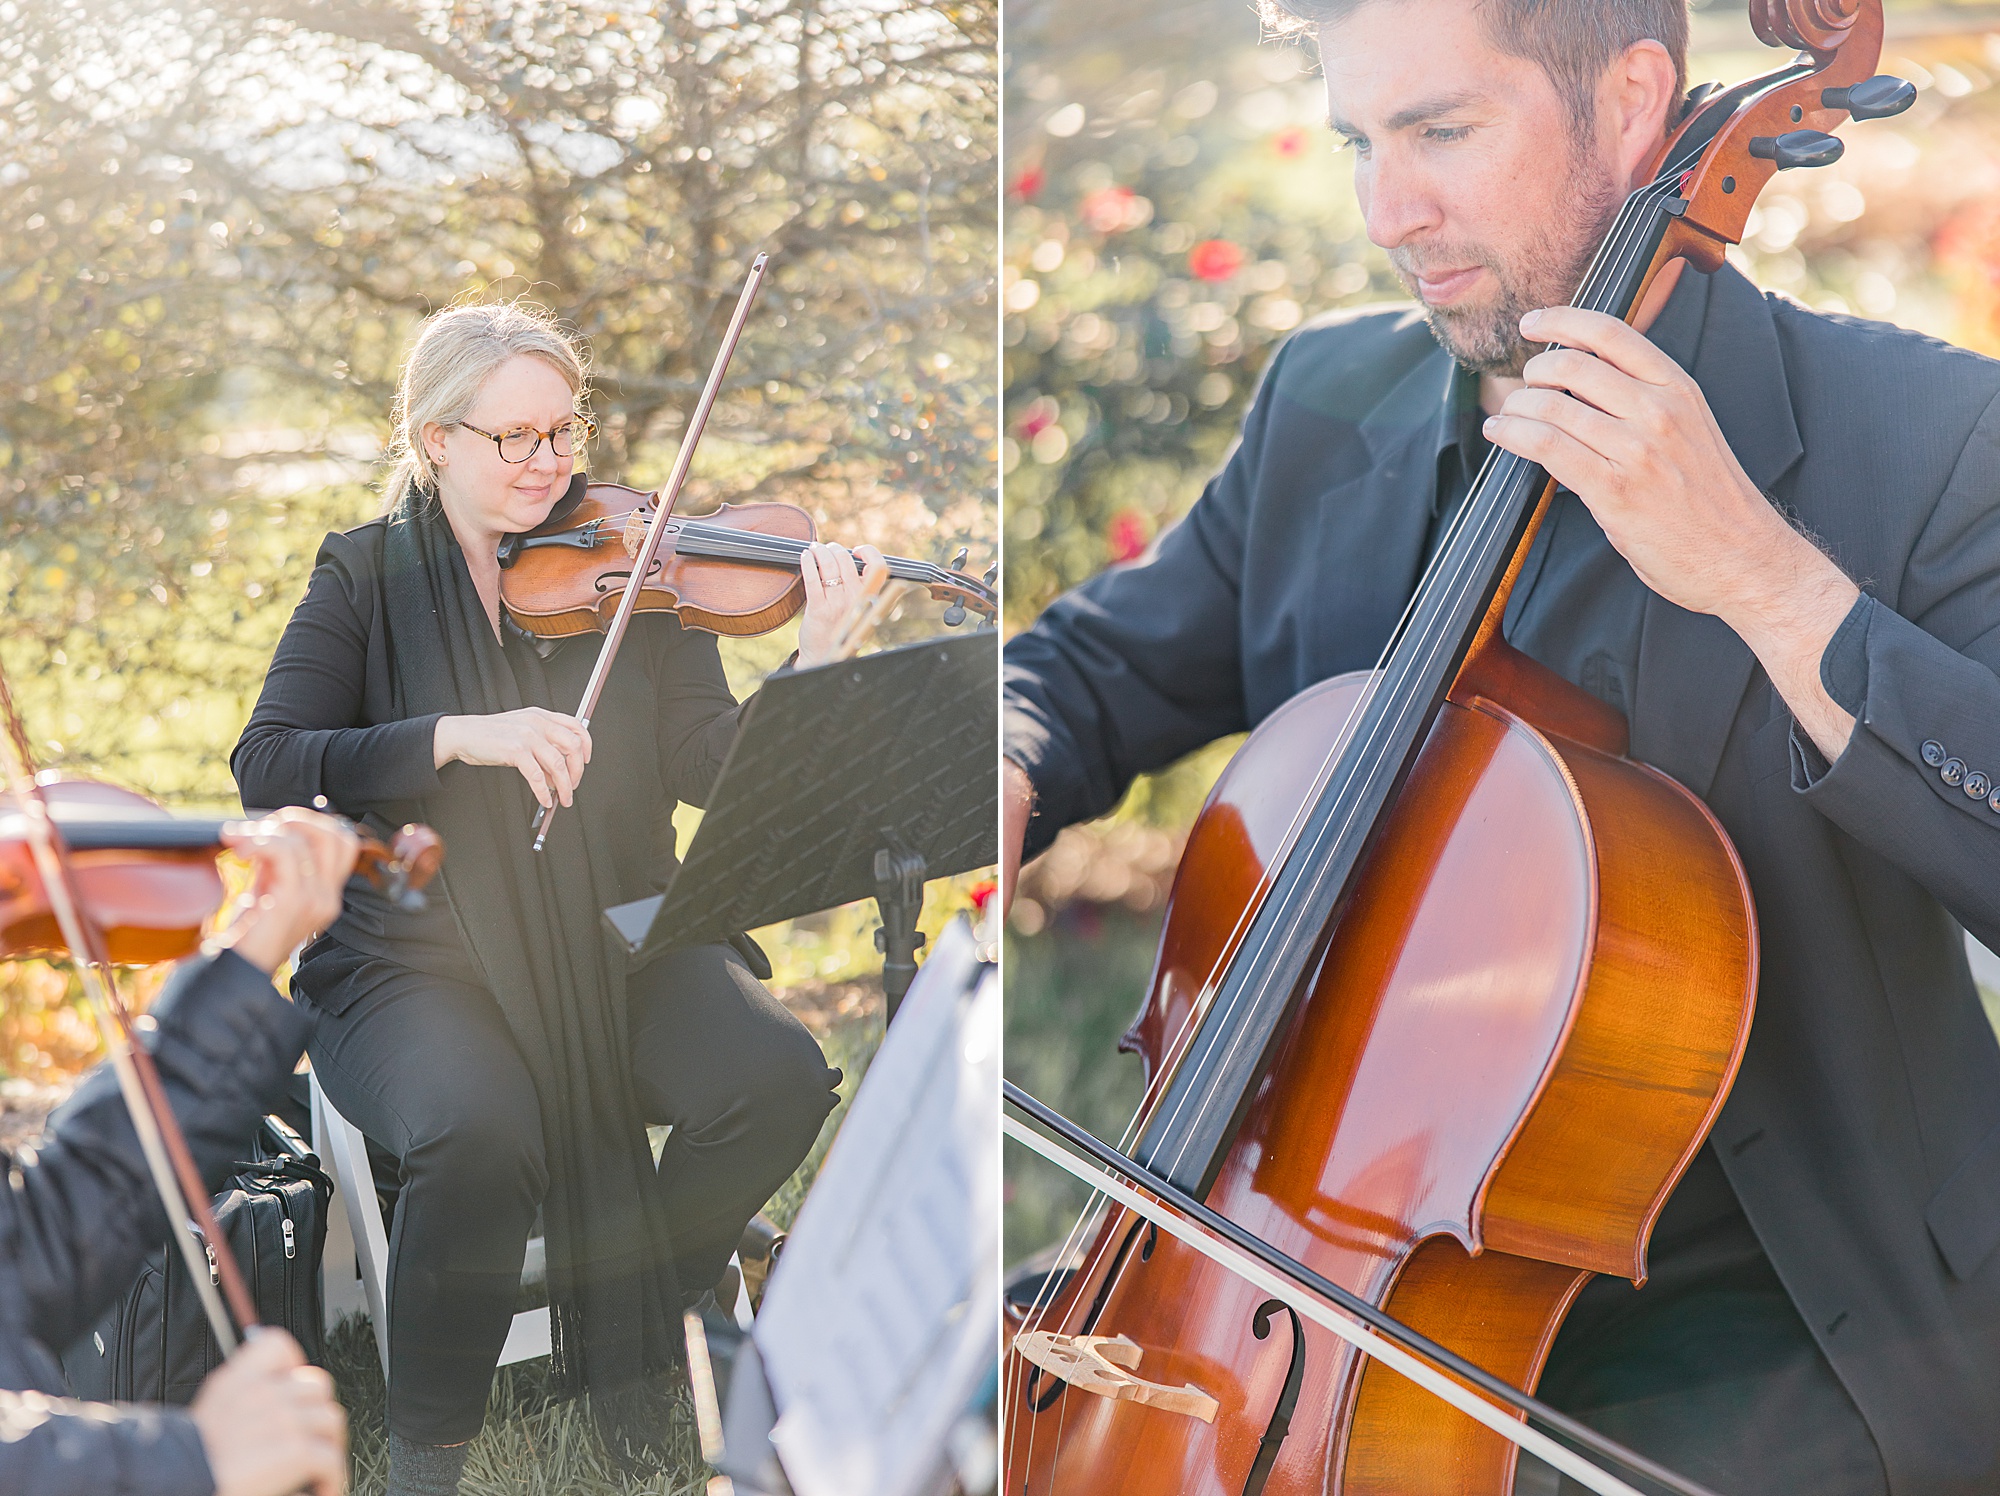 string musicians play during Asheville NC outdoor wedding ceremony